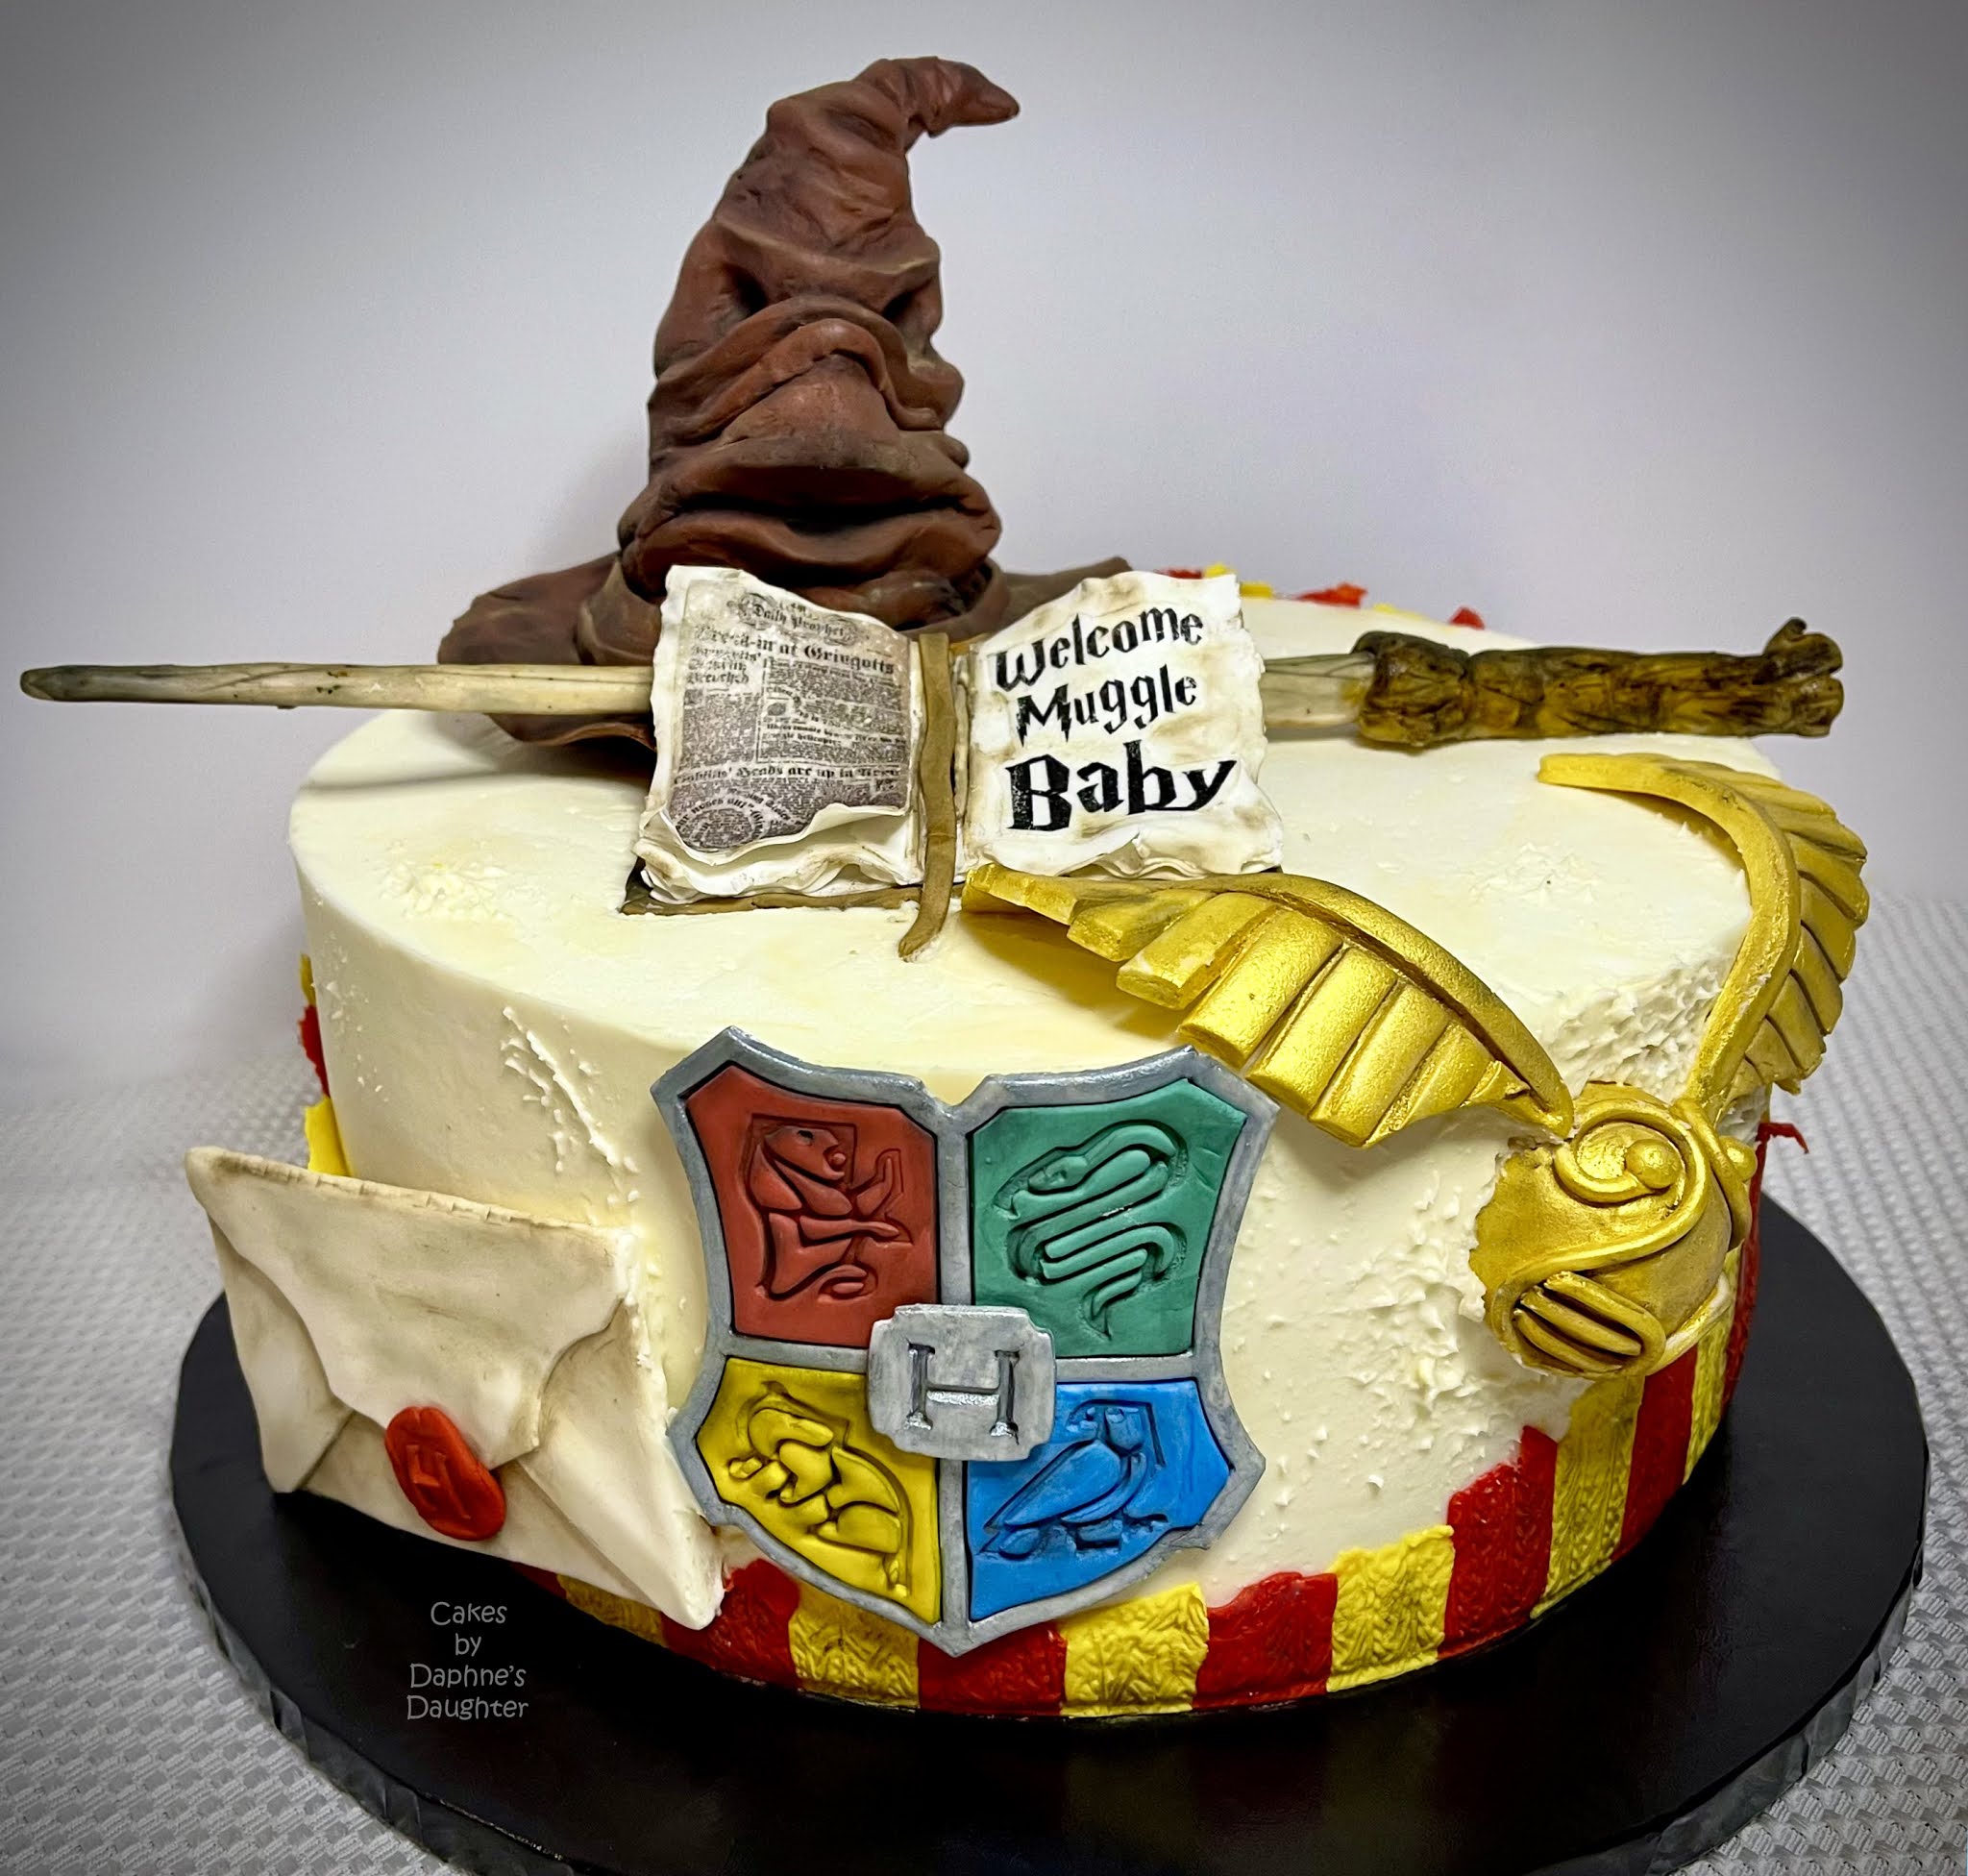 The Bake More: Harry Potter Baby Shower Cake & Cookie - Welcome Muggle Baby